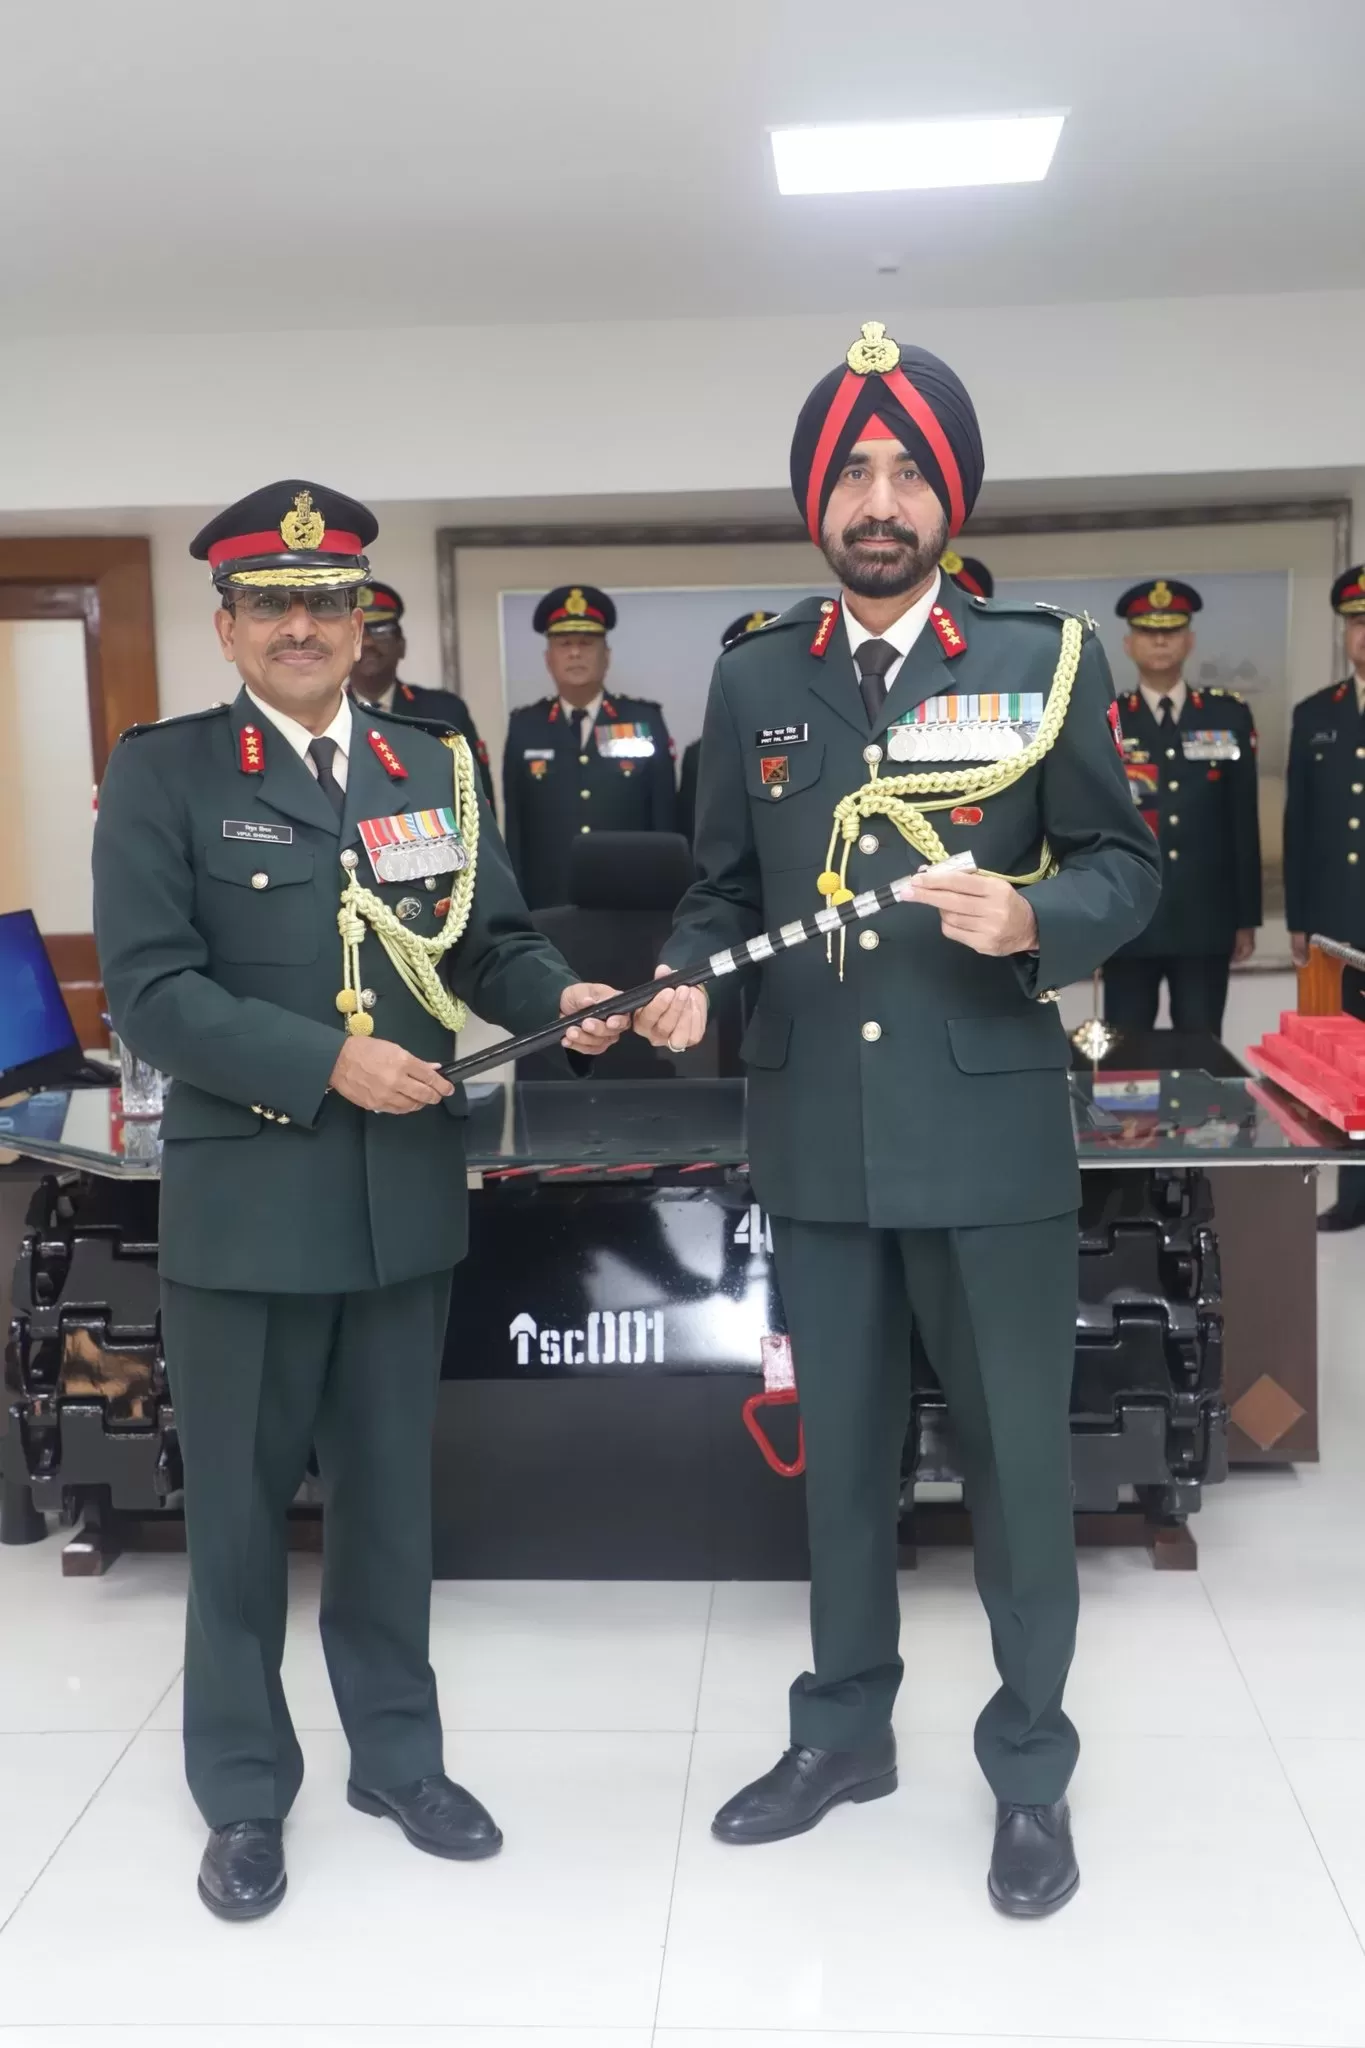 Lt Gen Prit Pal Singh assumed the command of the Sudarshan Chakra Corps